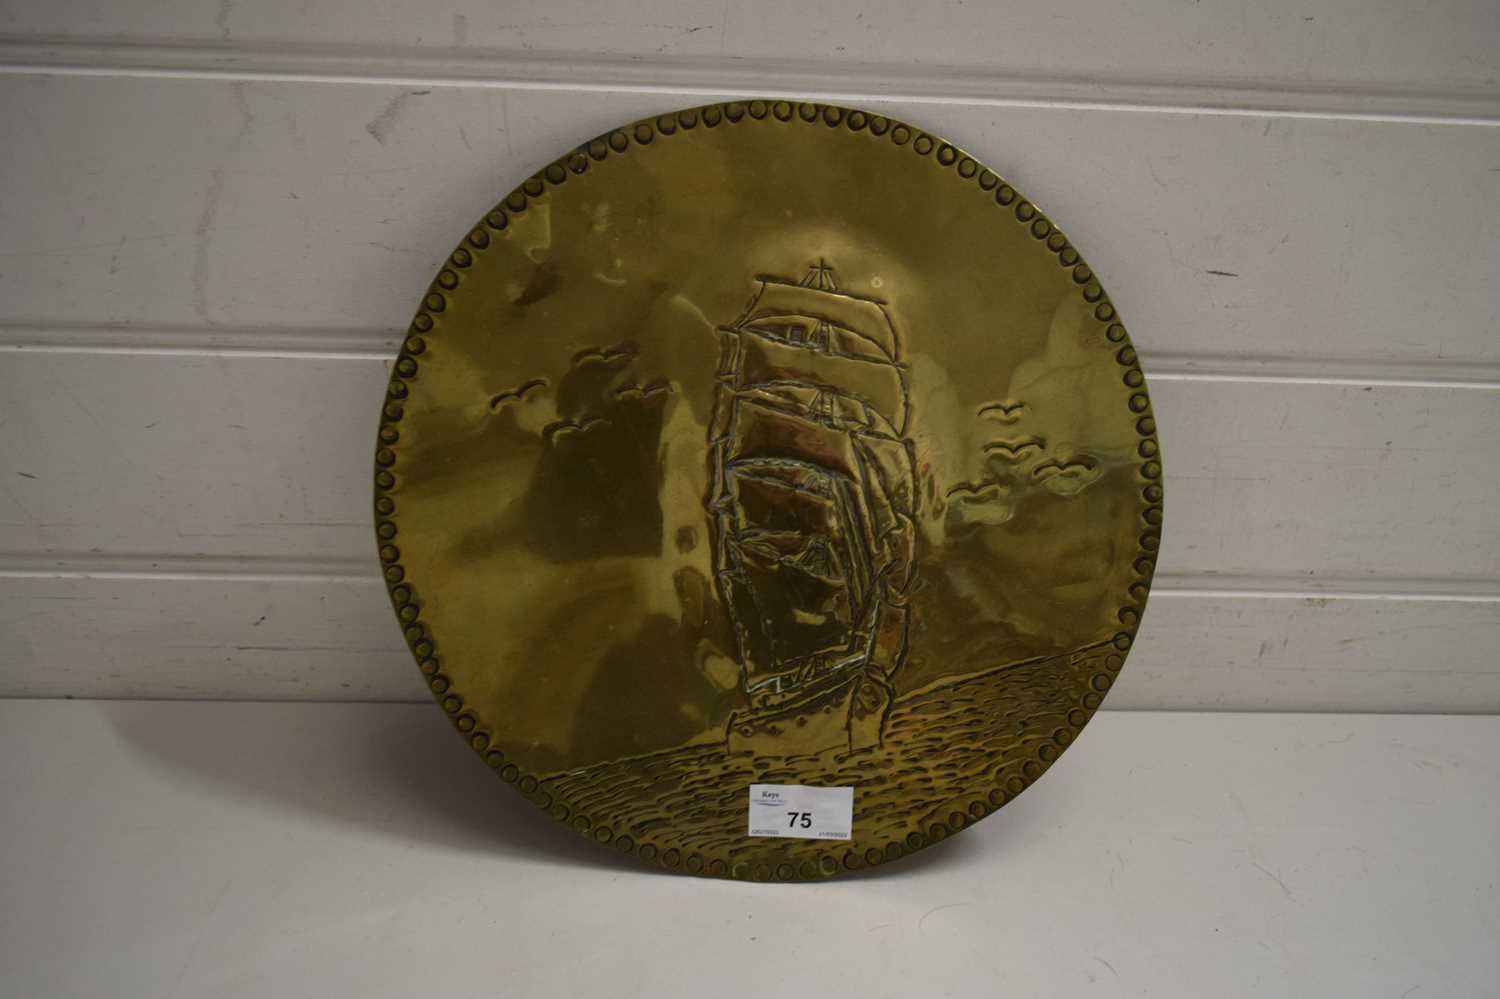 CIRCULAR BRASS WALL PLAQUE DECORATED WITH A TALL SHIP